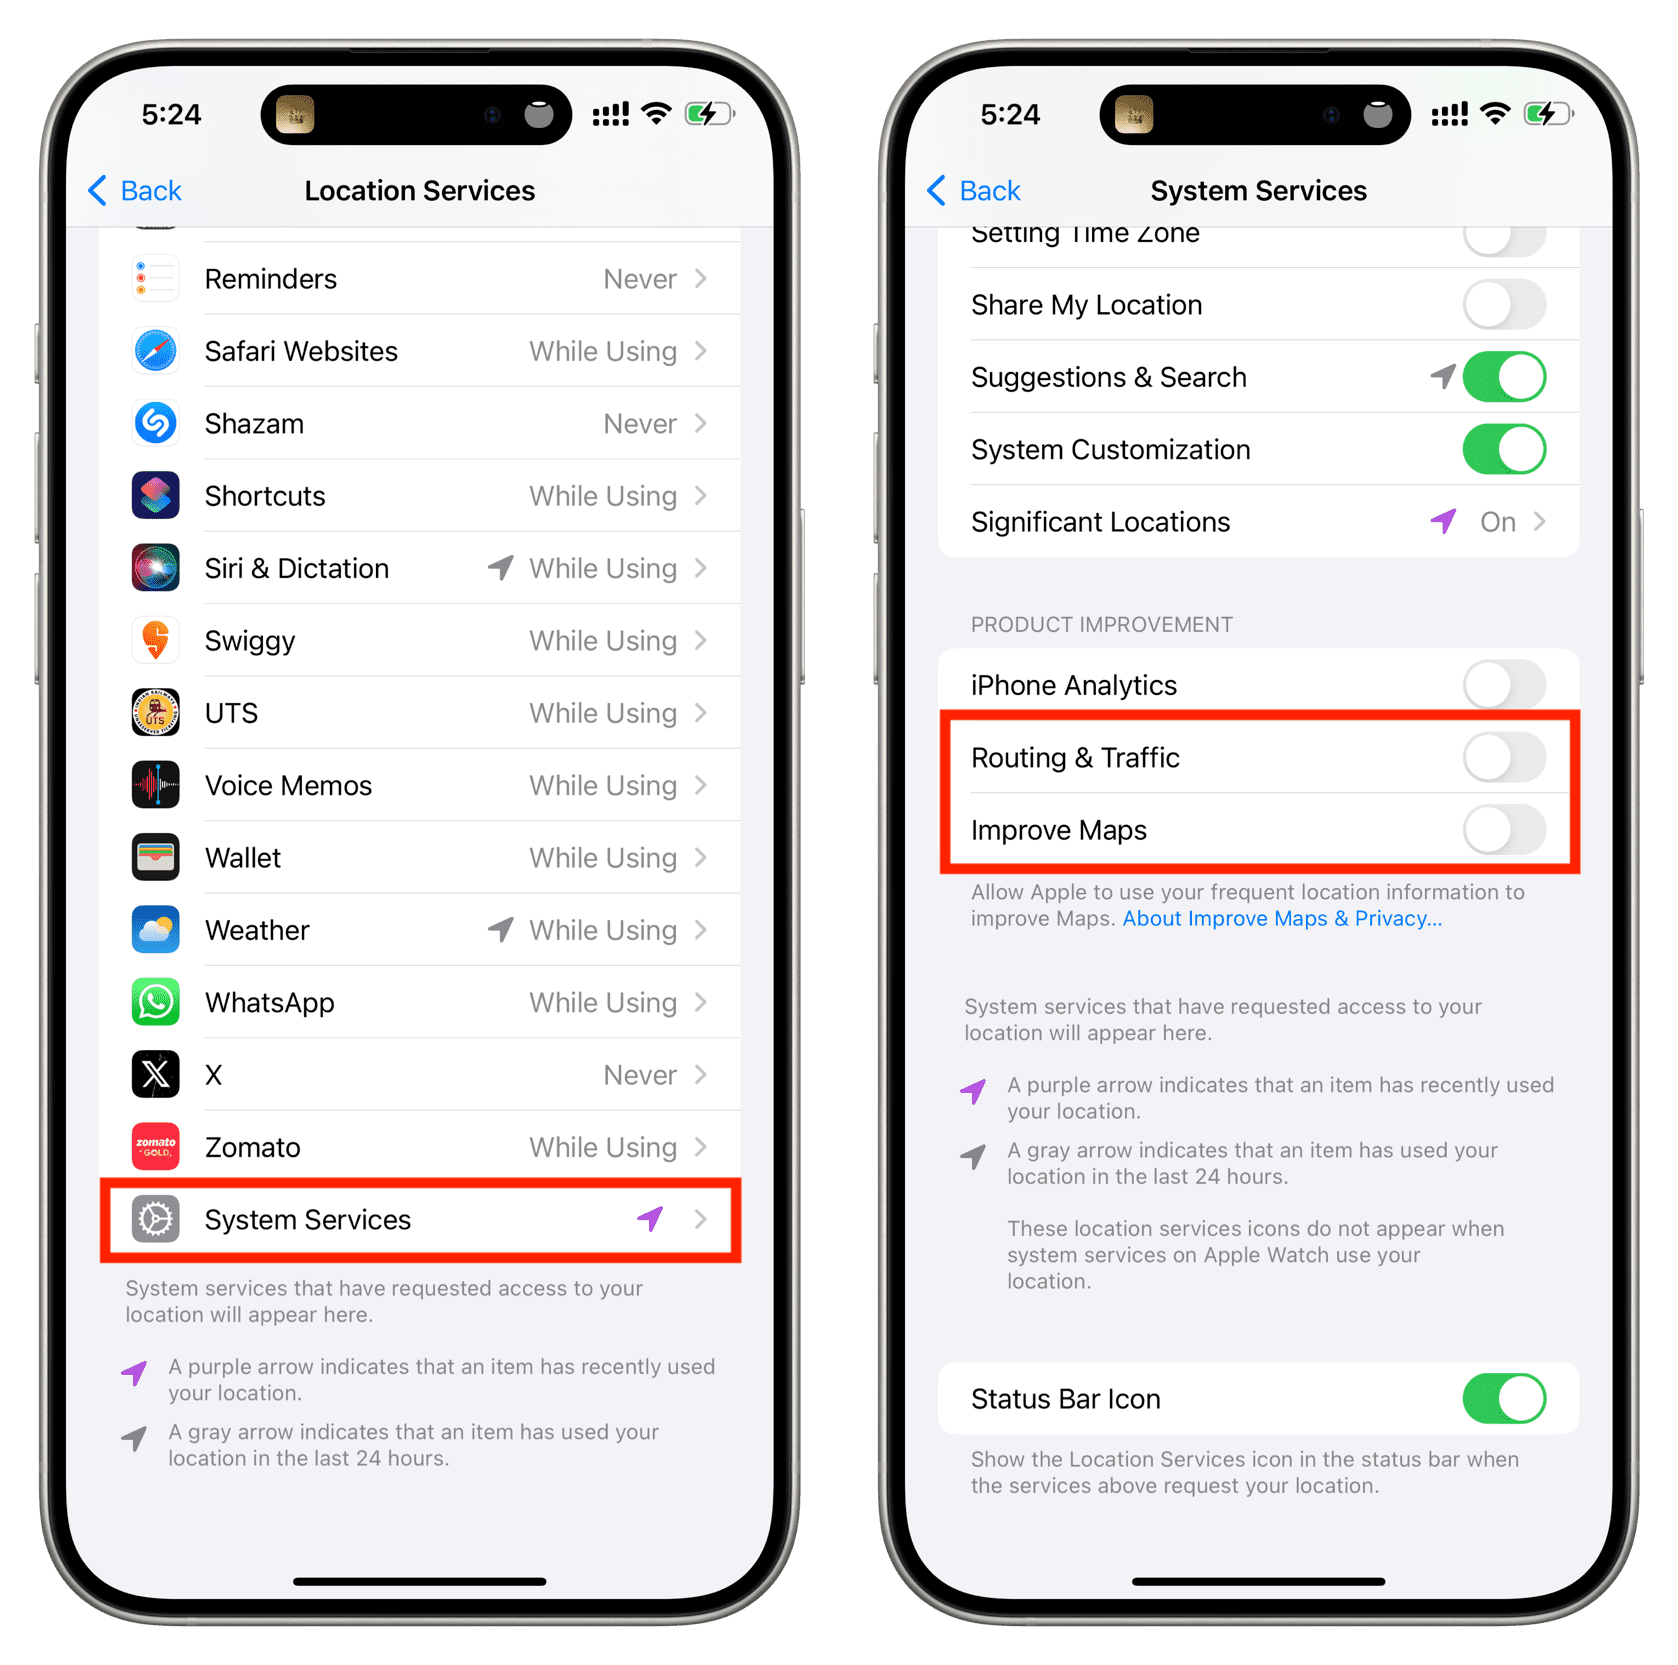 Turn off Routing & Traffic and Improve Maps in iPhone Location settings